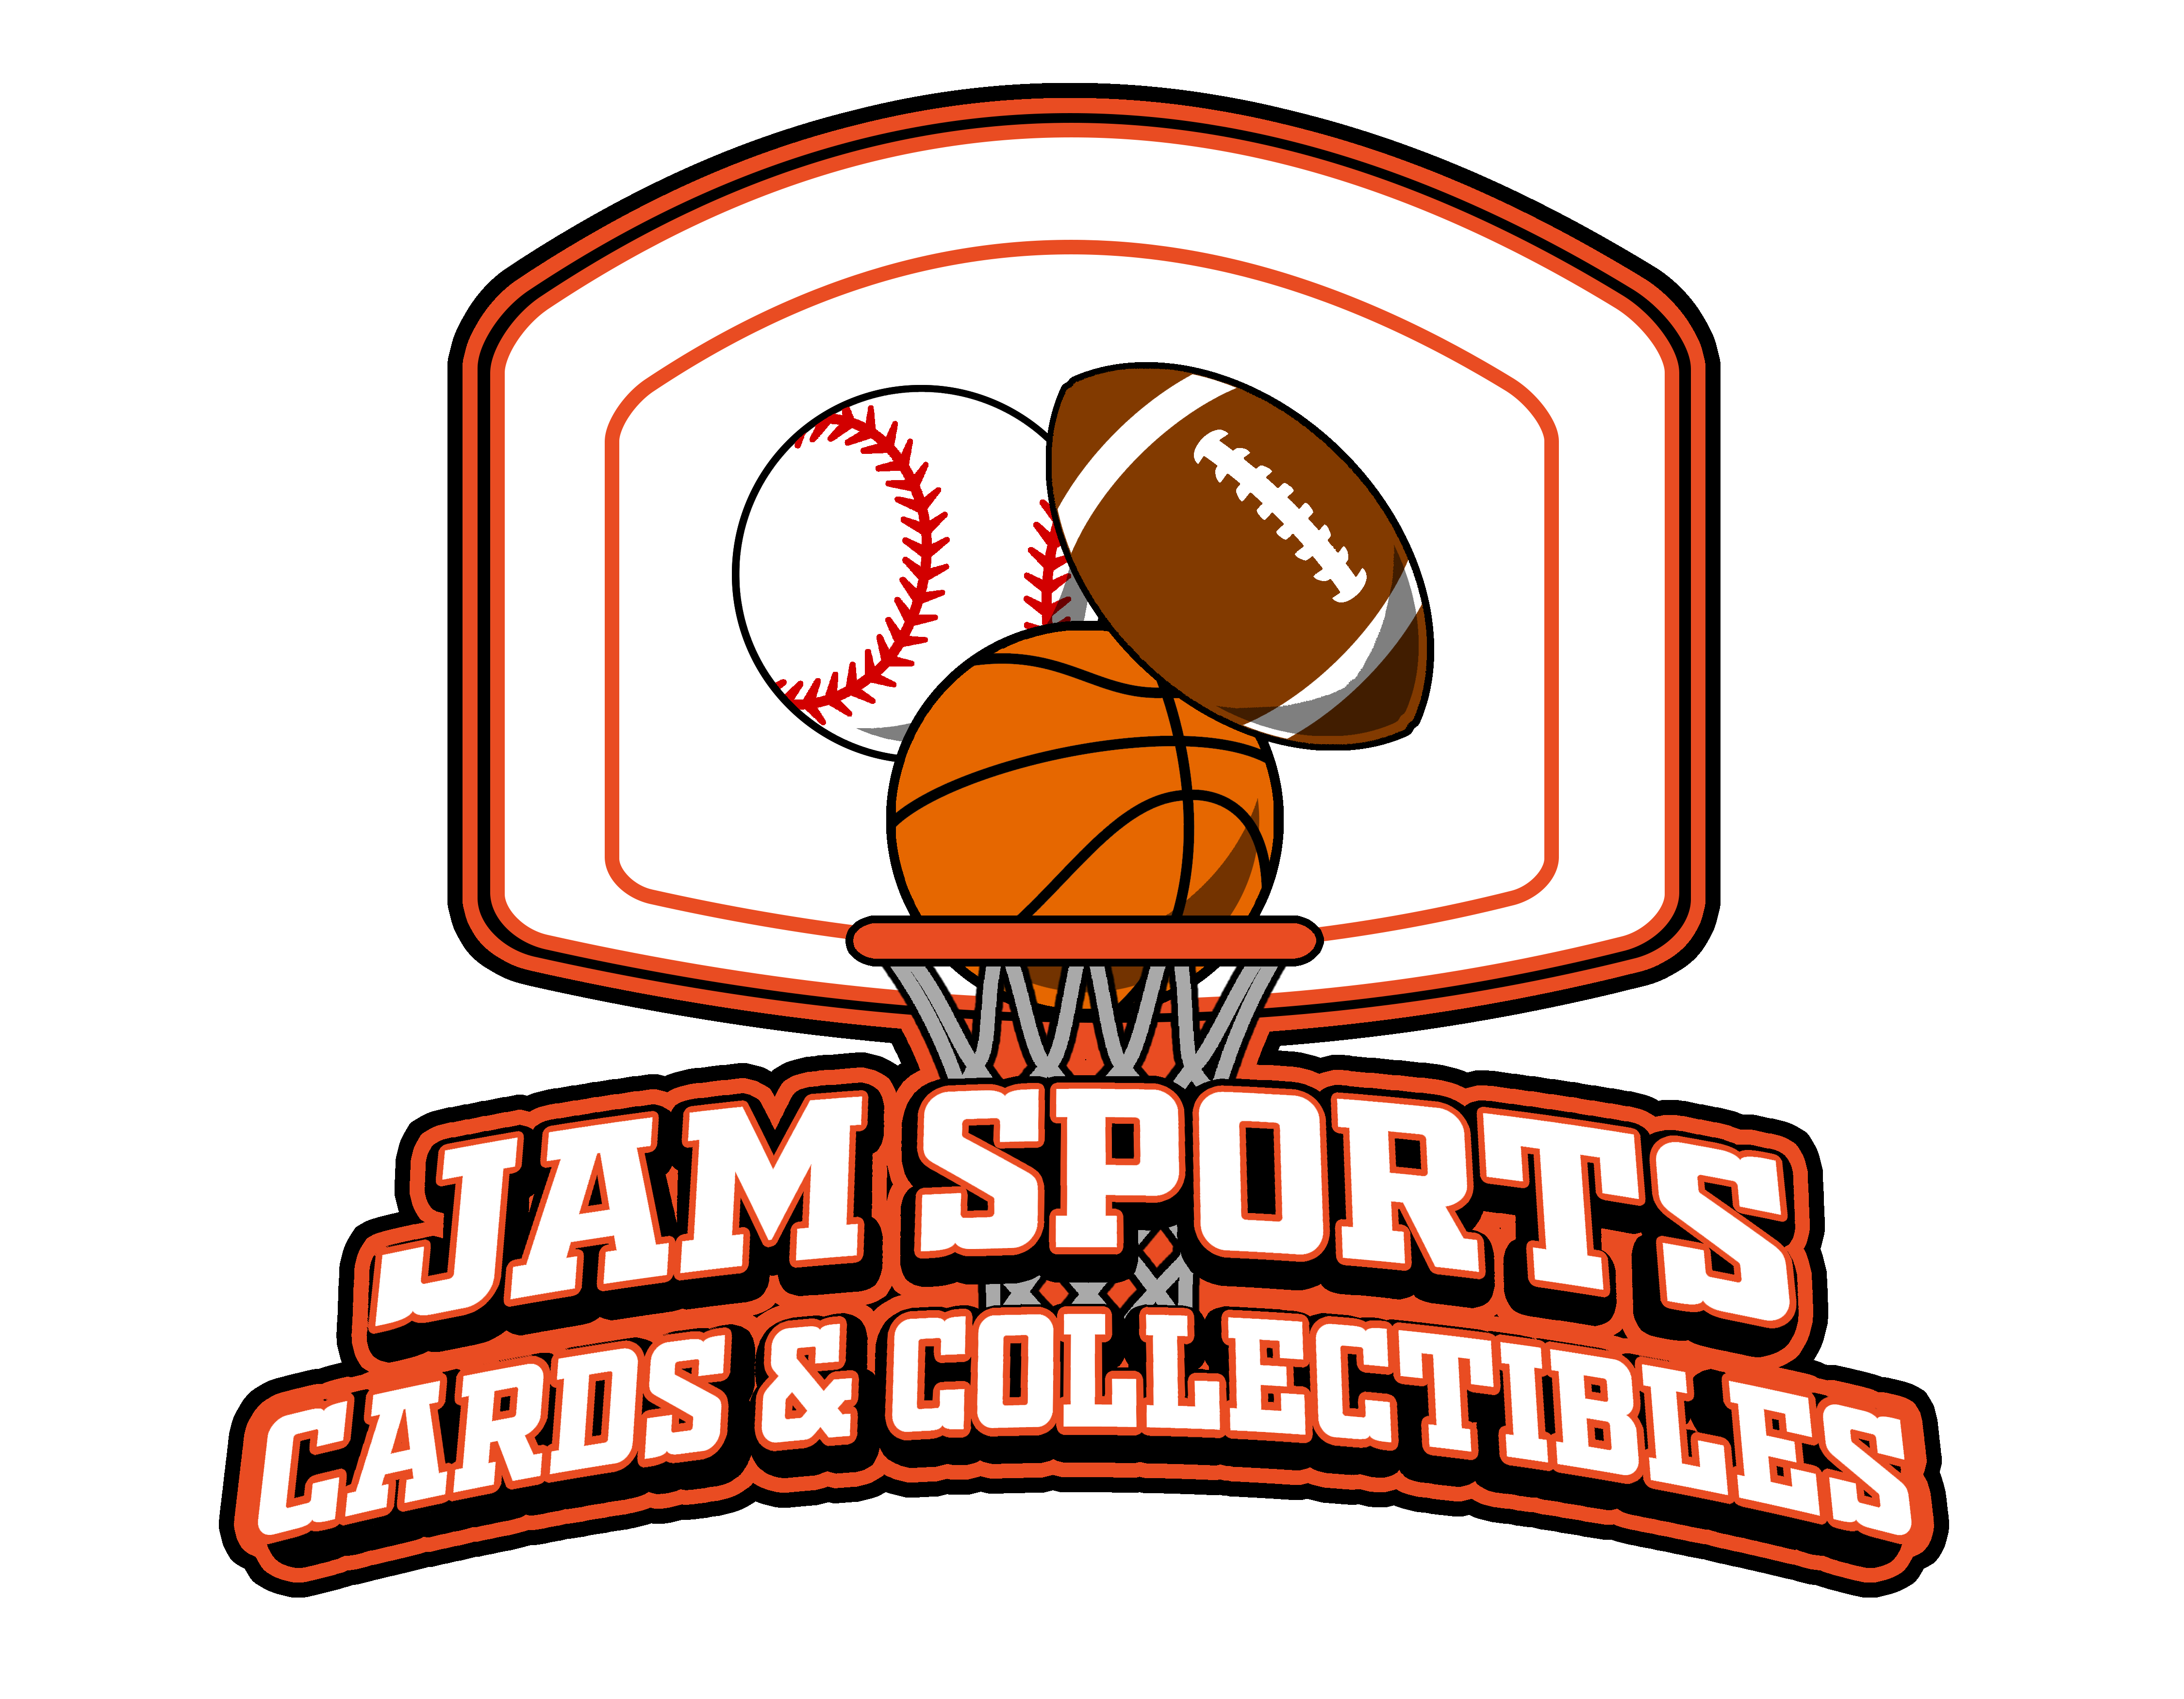 JAM Sports Cards & Collectibles (Staten Island)